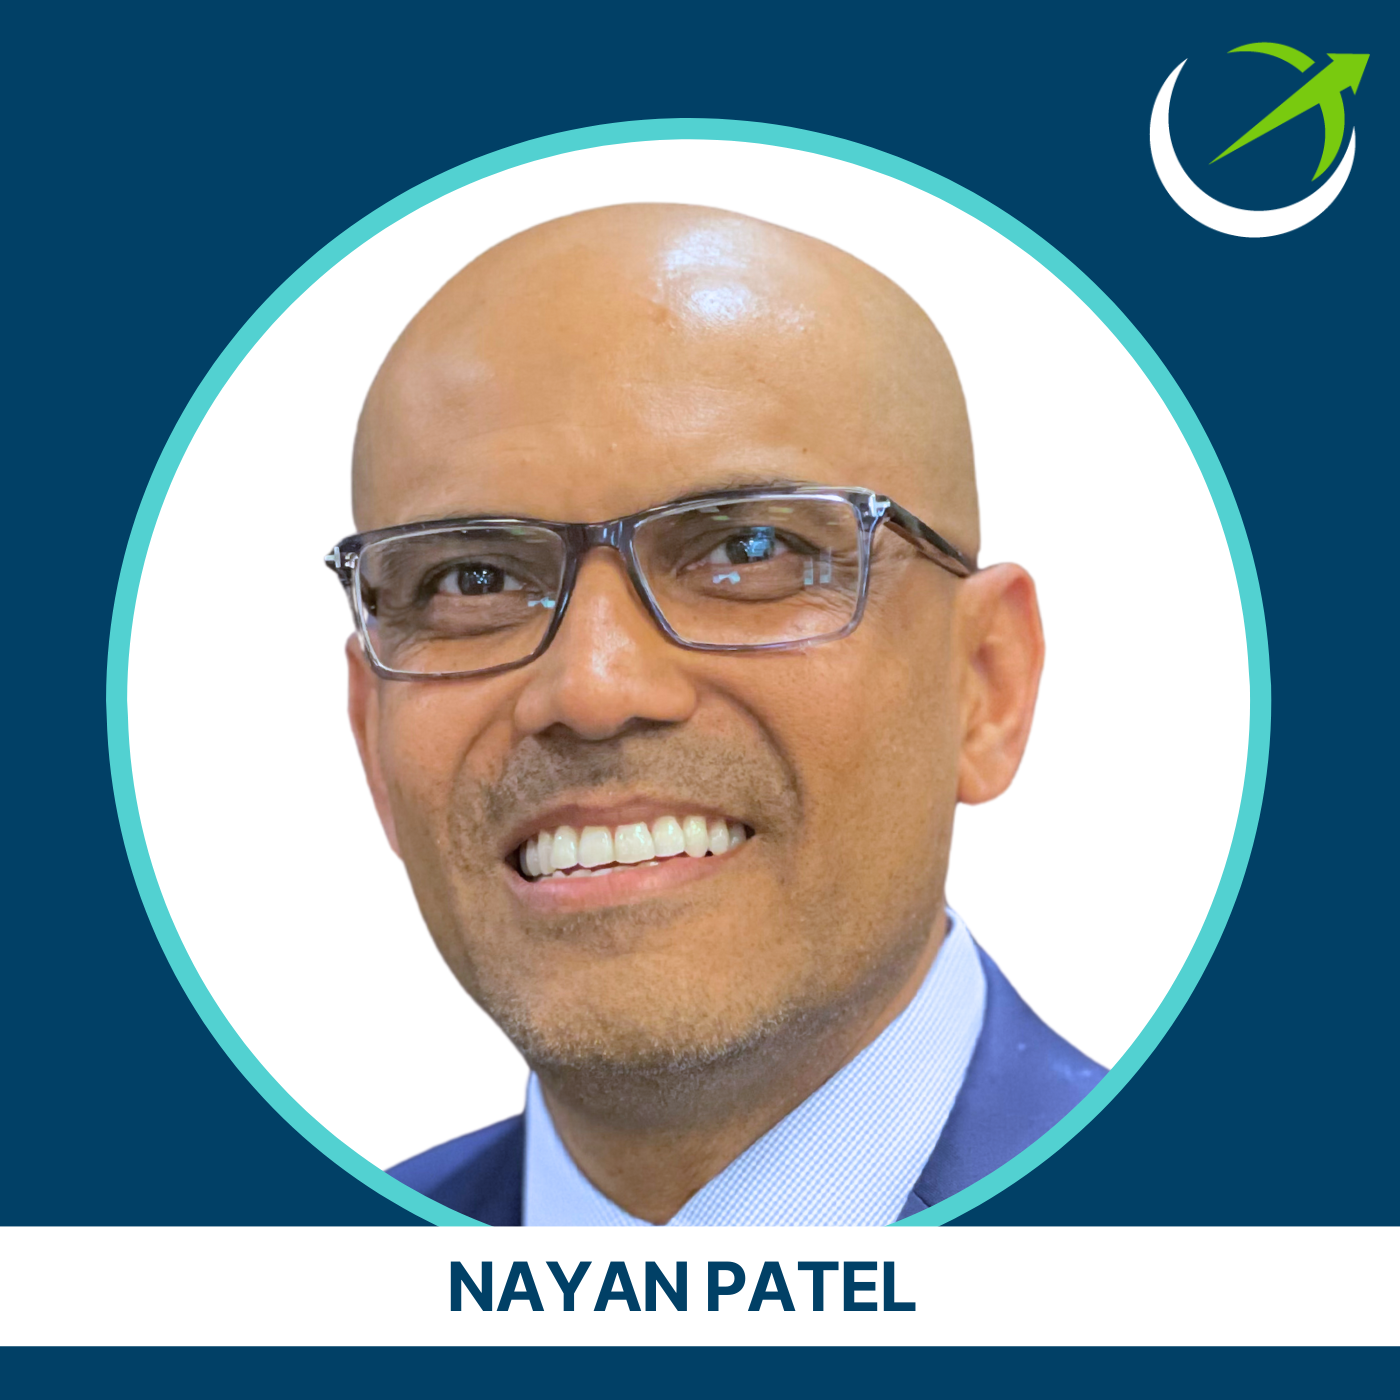 Incredible Facts & Practical How-To's For Using The Master Antioxidant Glutathione (Including The #1 Delivery Mechanism), With Dr. Nayan Patel